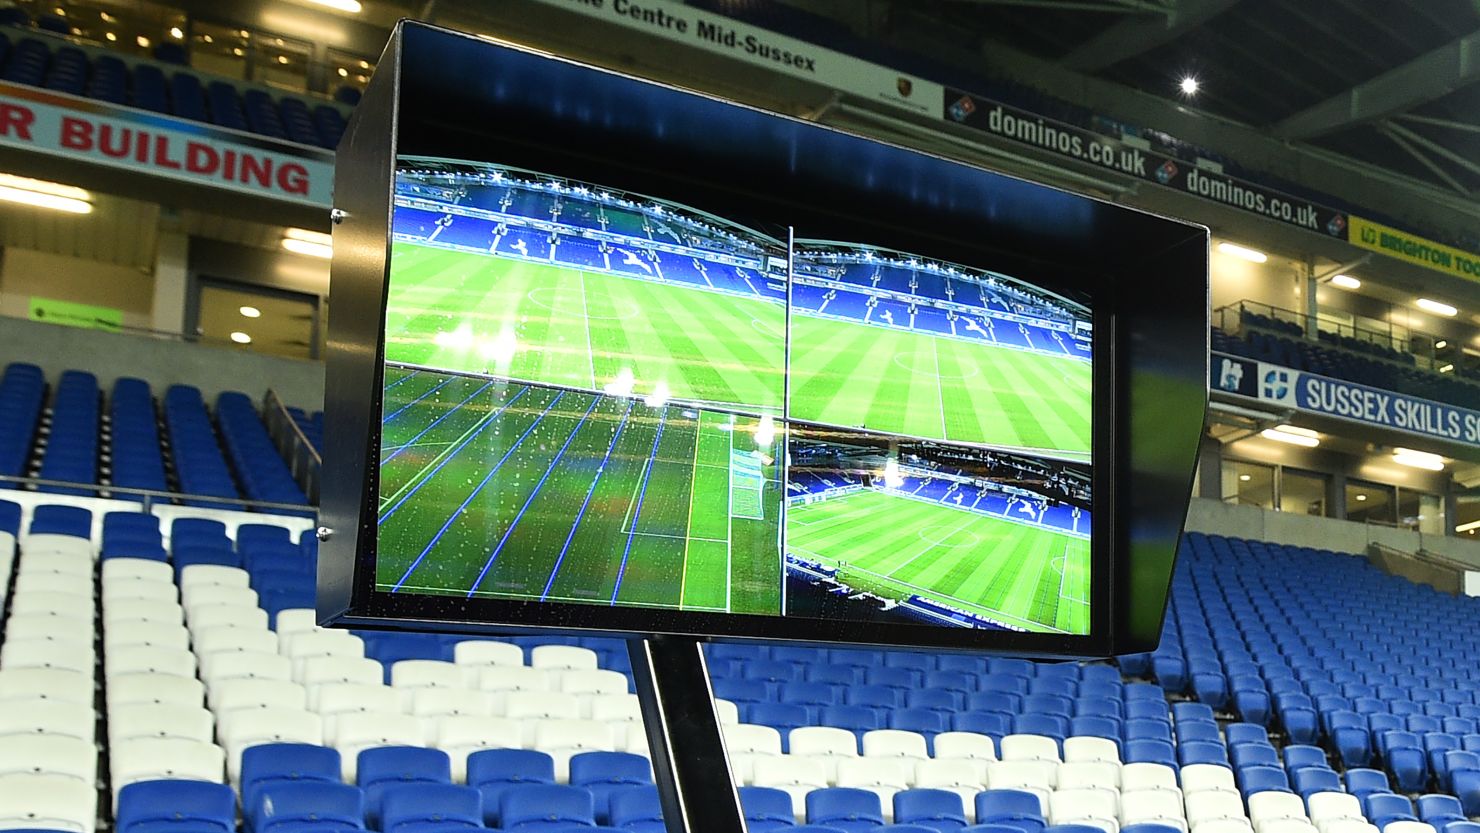 The Video Assistant Referee (VAR) system pitchside during the FA Cup clash between Brighton and Crystal Palace.